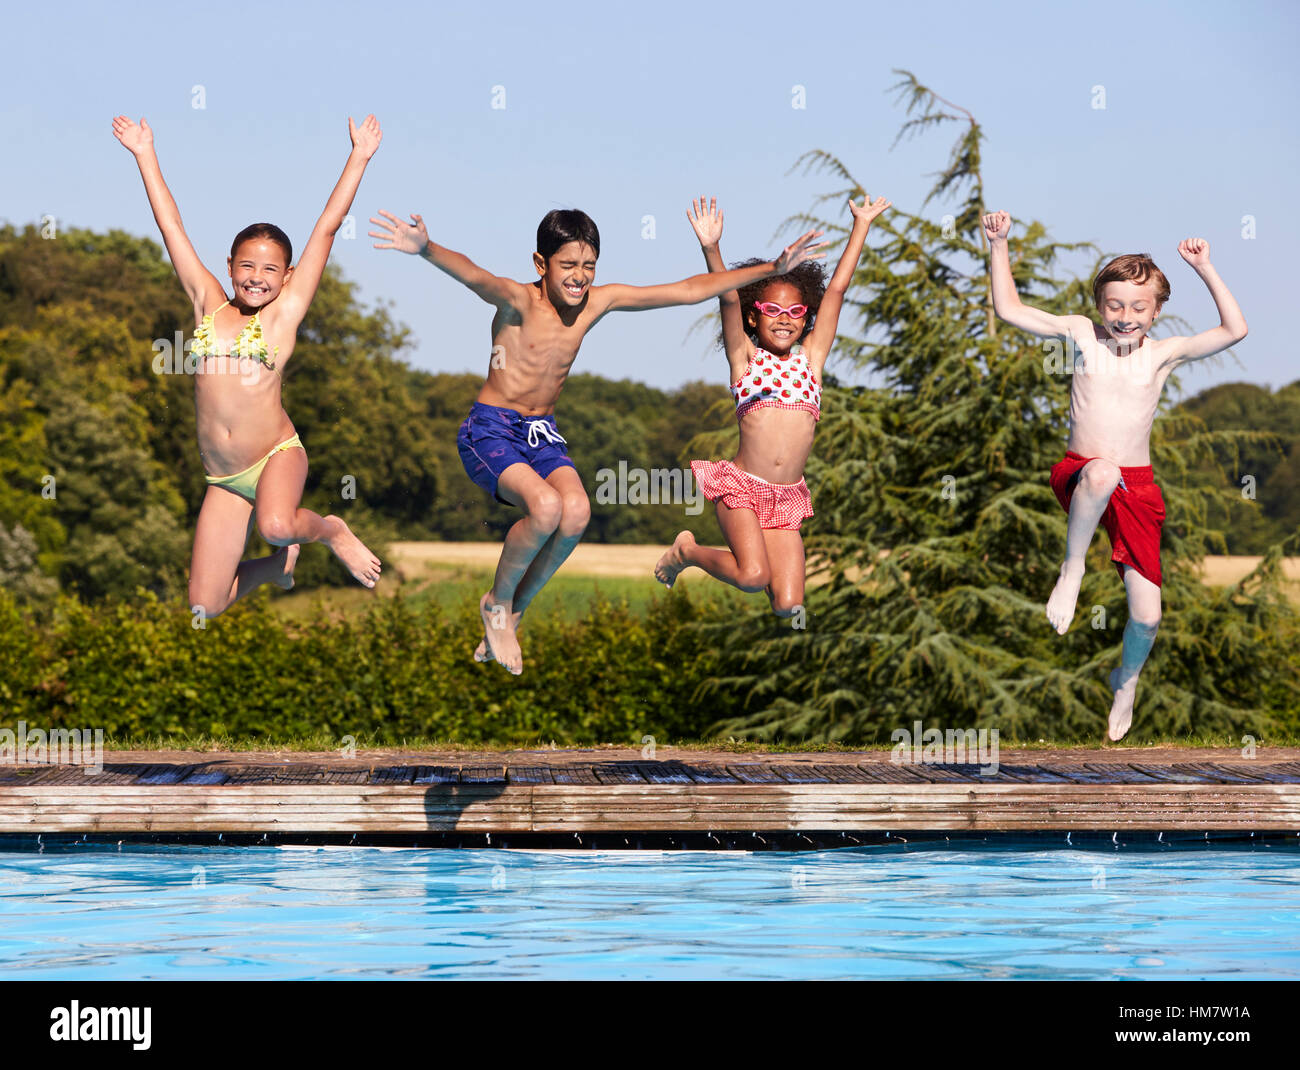 Group Of Children Jumping Into Outdoor Swimming Pool Stock Photo